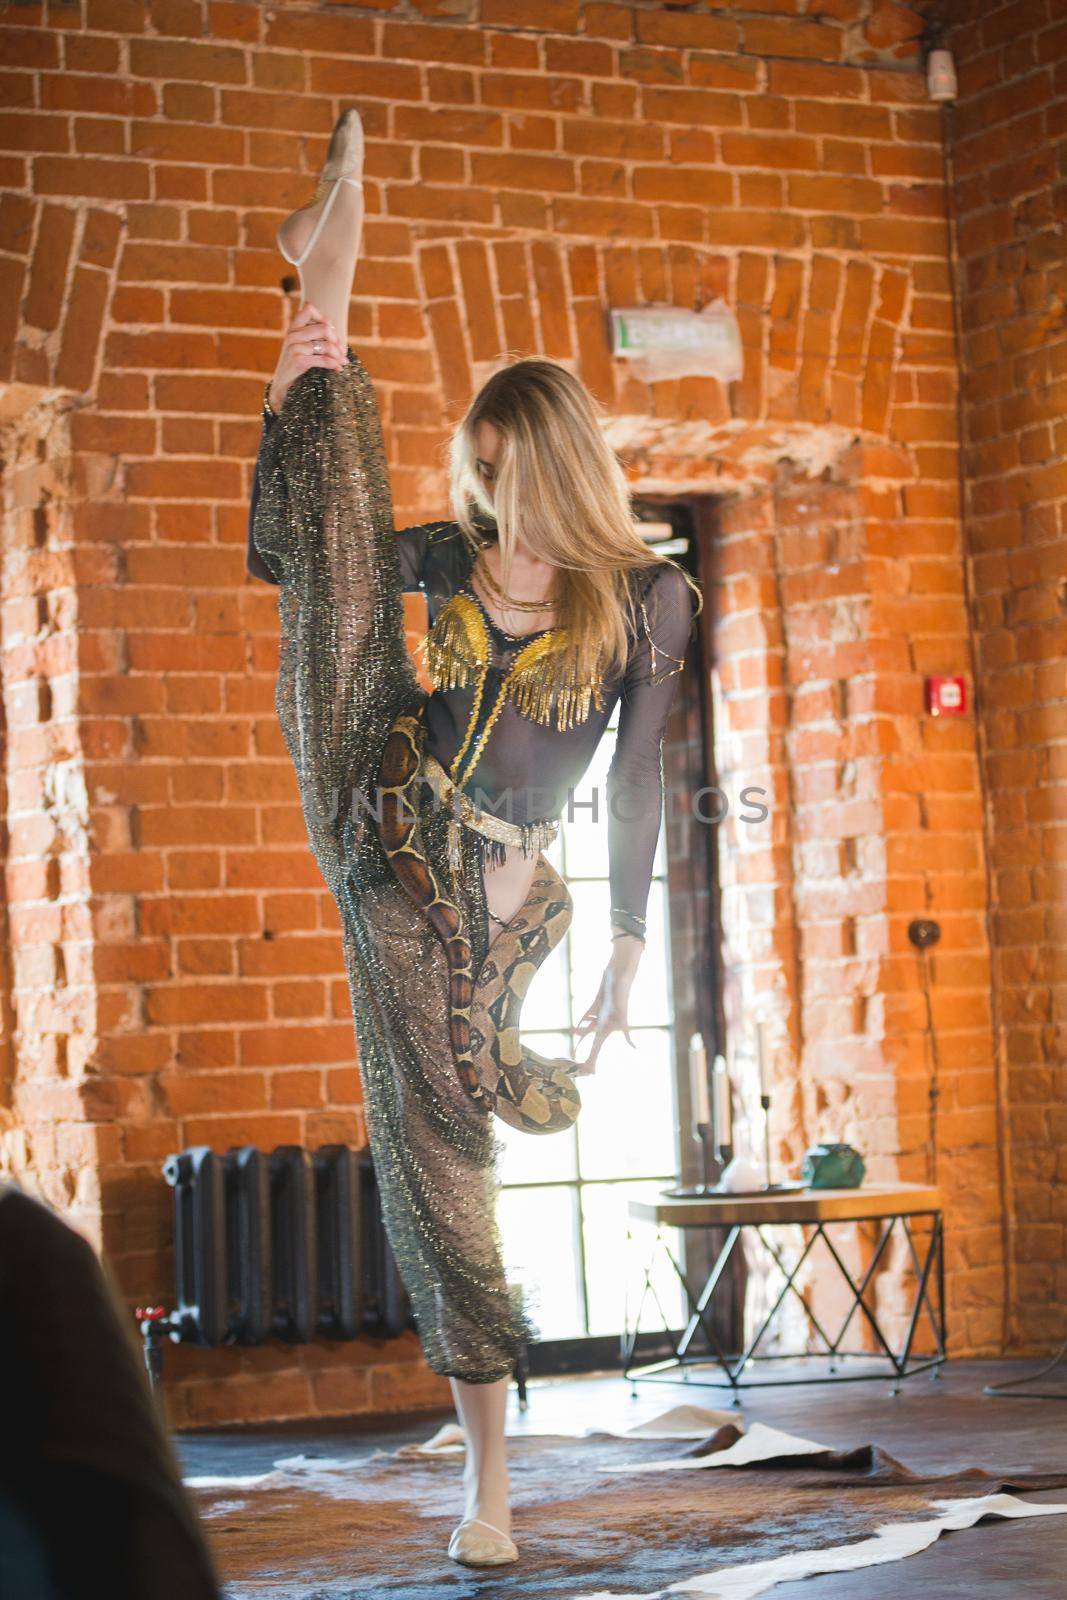 Slim female performing dance with a snake in studia by Studia72